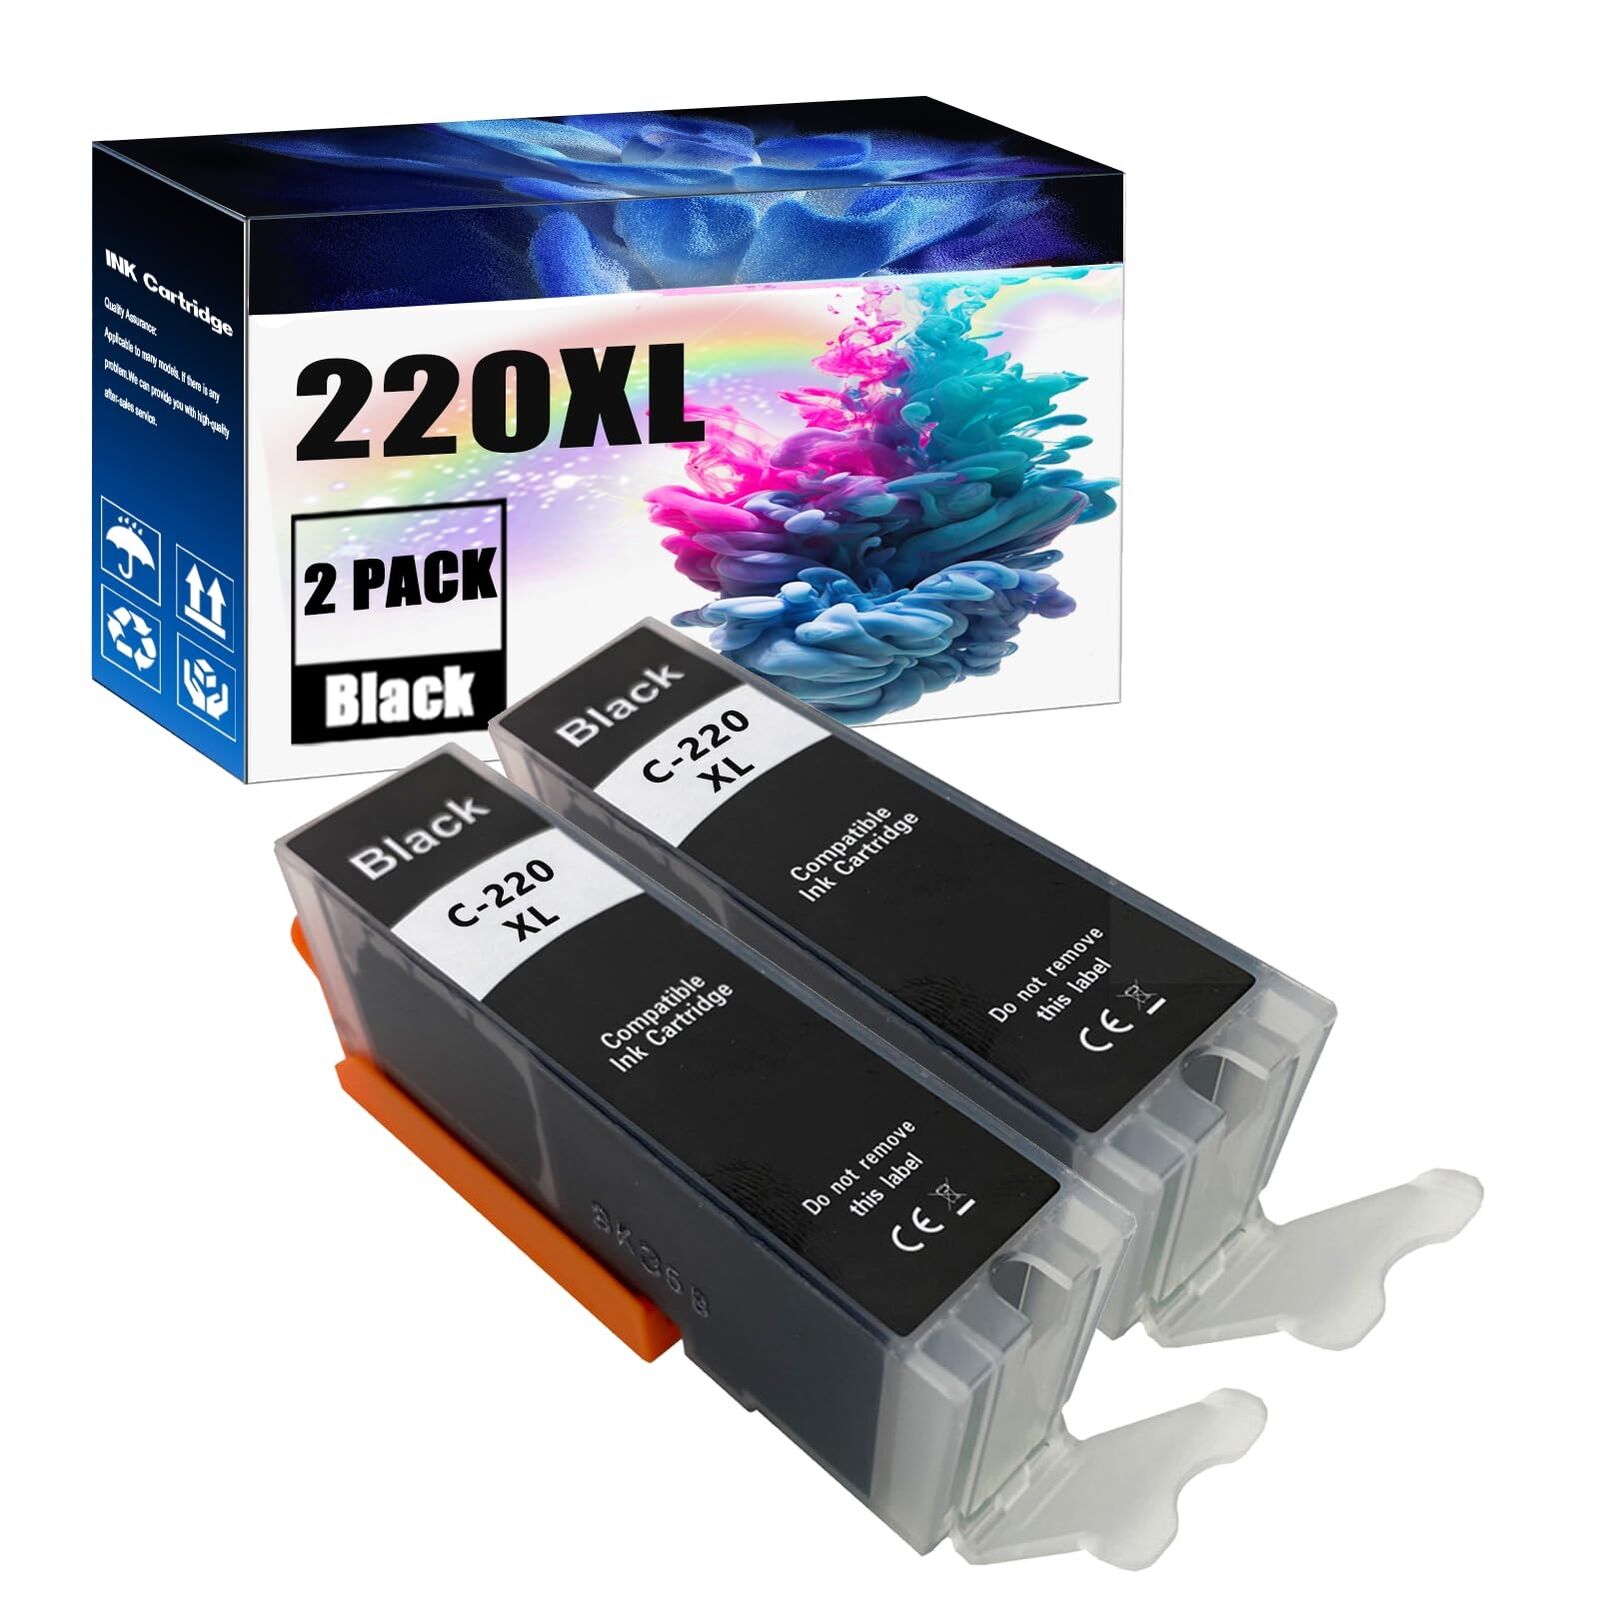 PGI-220 XL Double Black Ink Cartridges Replacement for Canon MX860 MP620 MP560